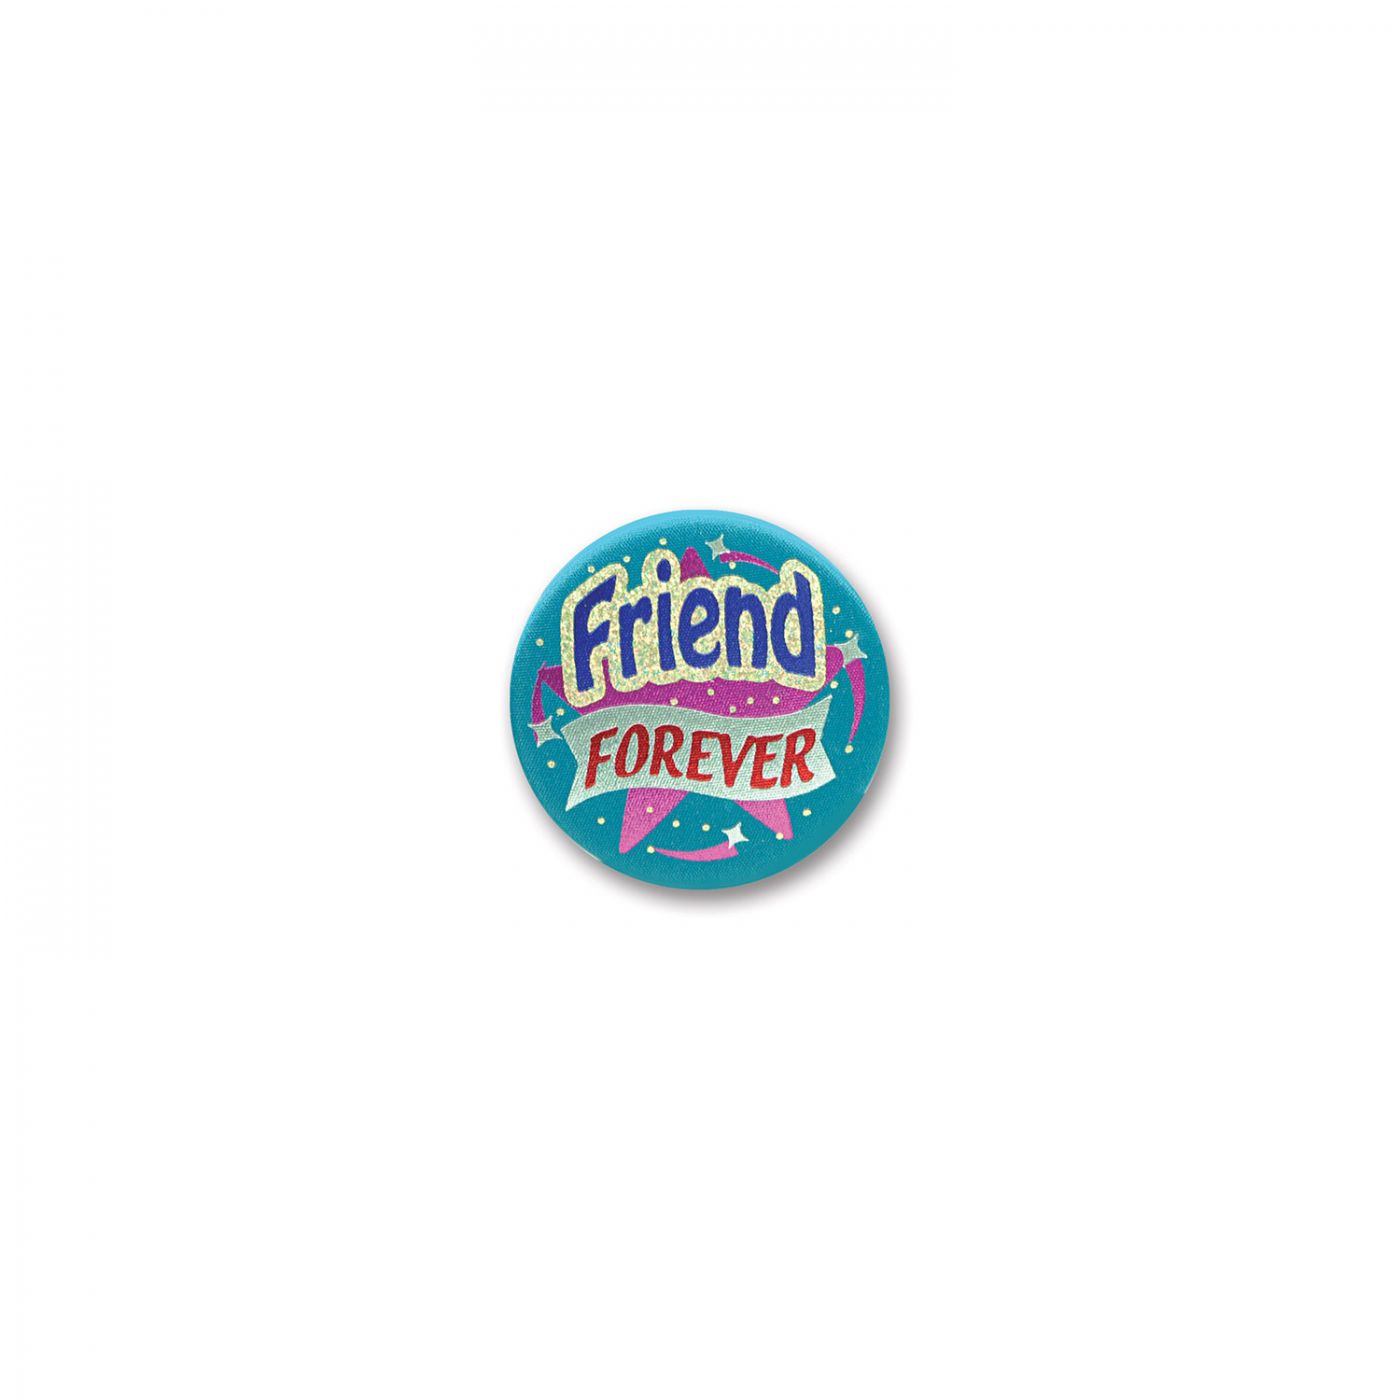 Friend Forever Satin Button (6) image